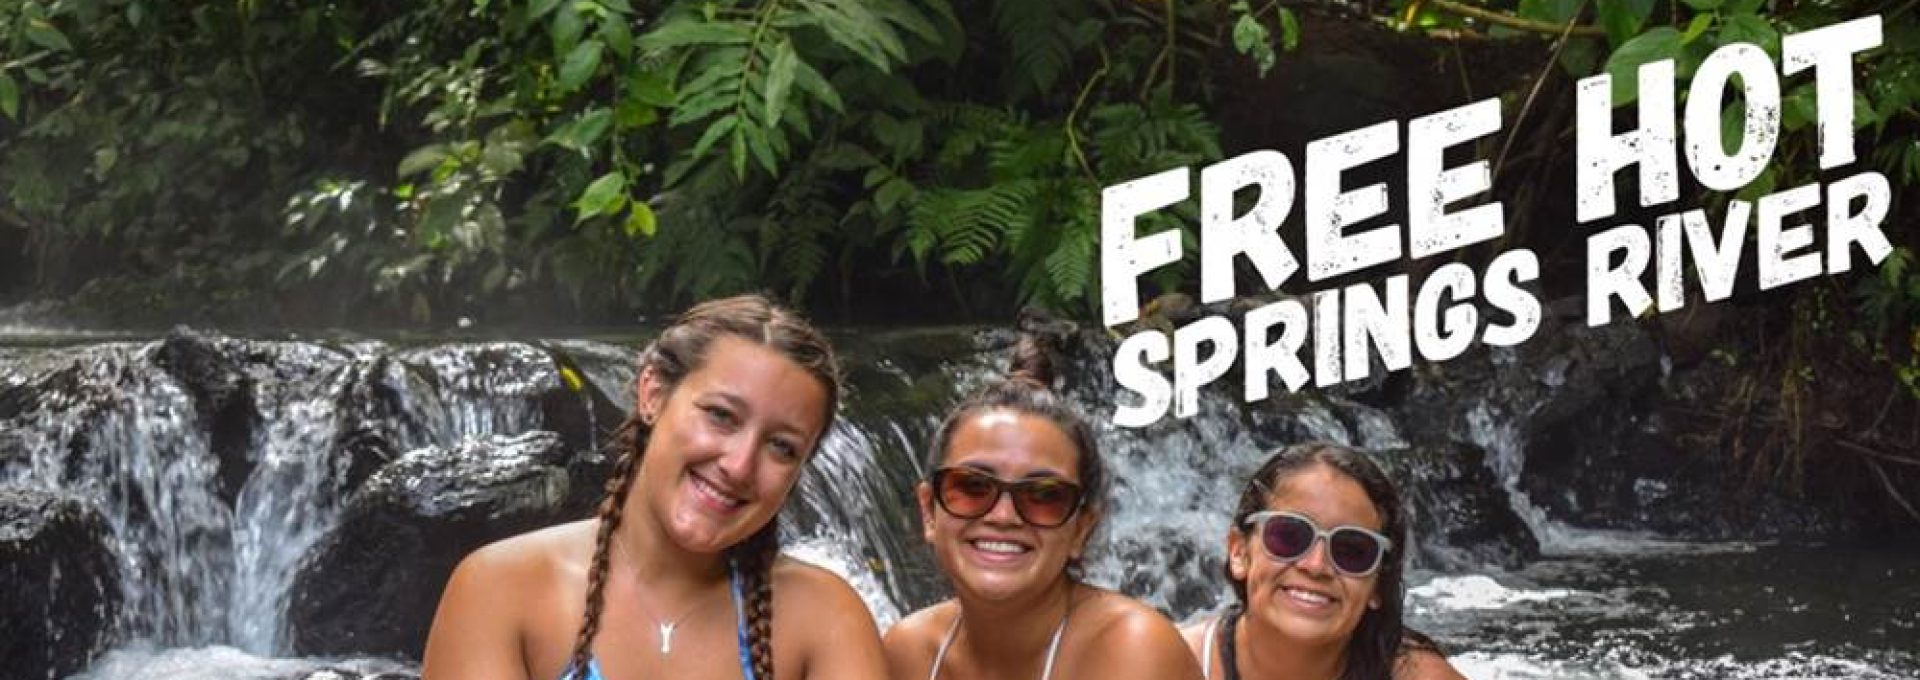 Hostel Backpackers Arenal Costa Rica